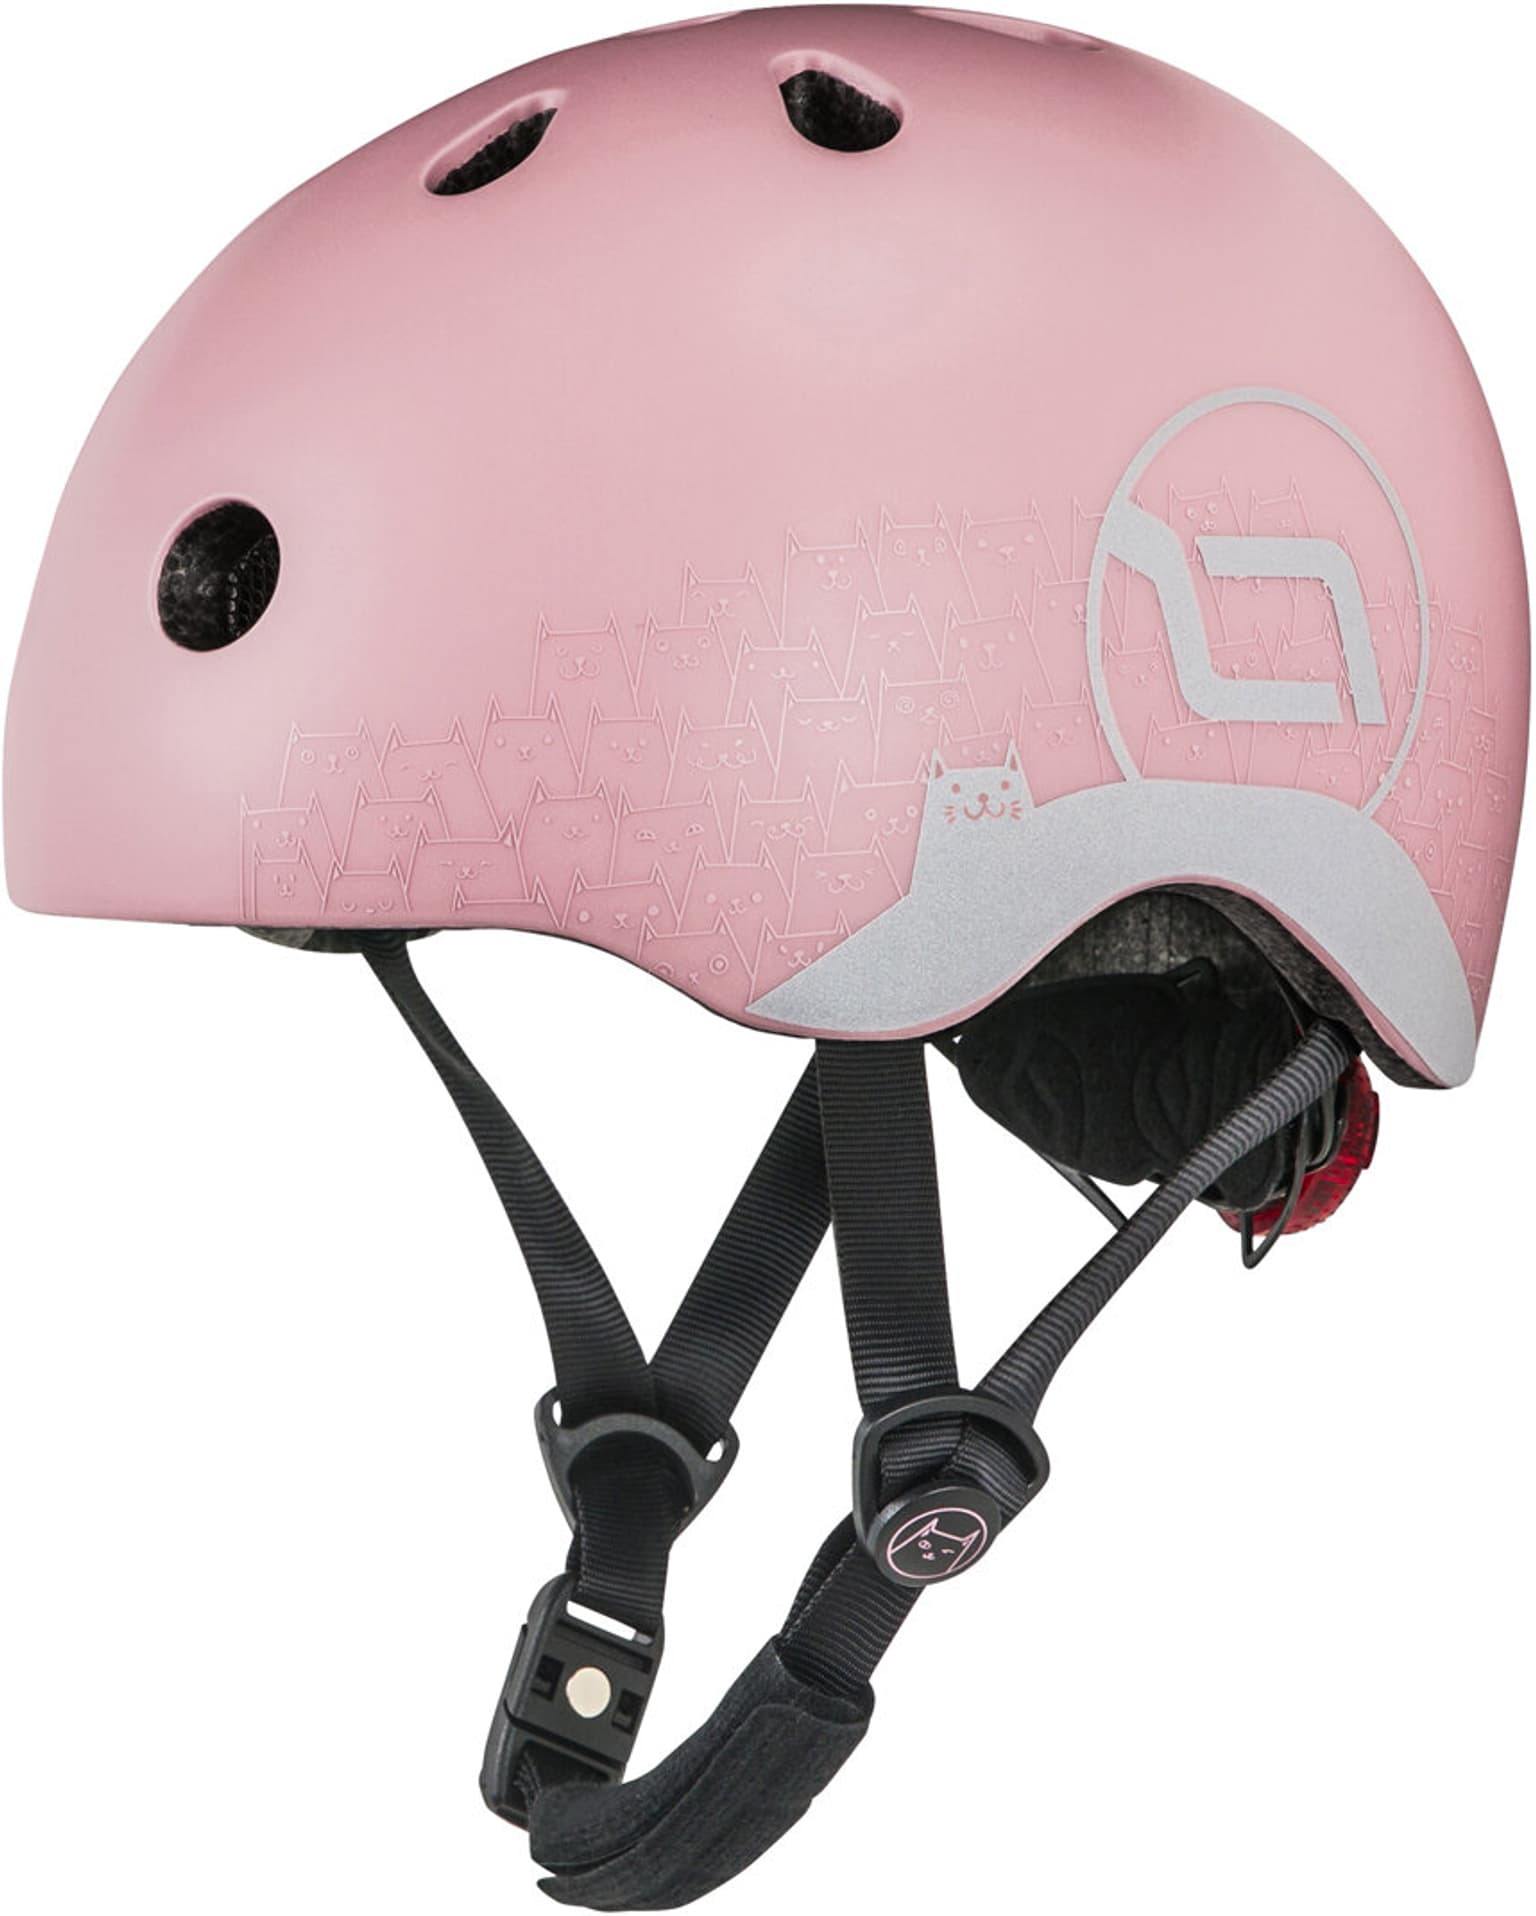 Scoot and Ride Scoot and Ride Reflective Rose Casque de patinage vieux-rose 1